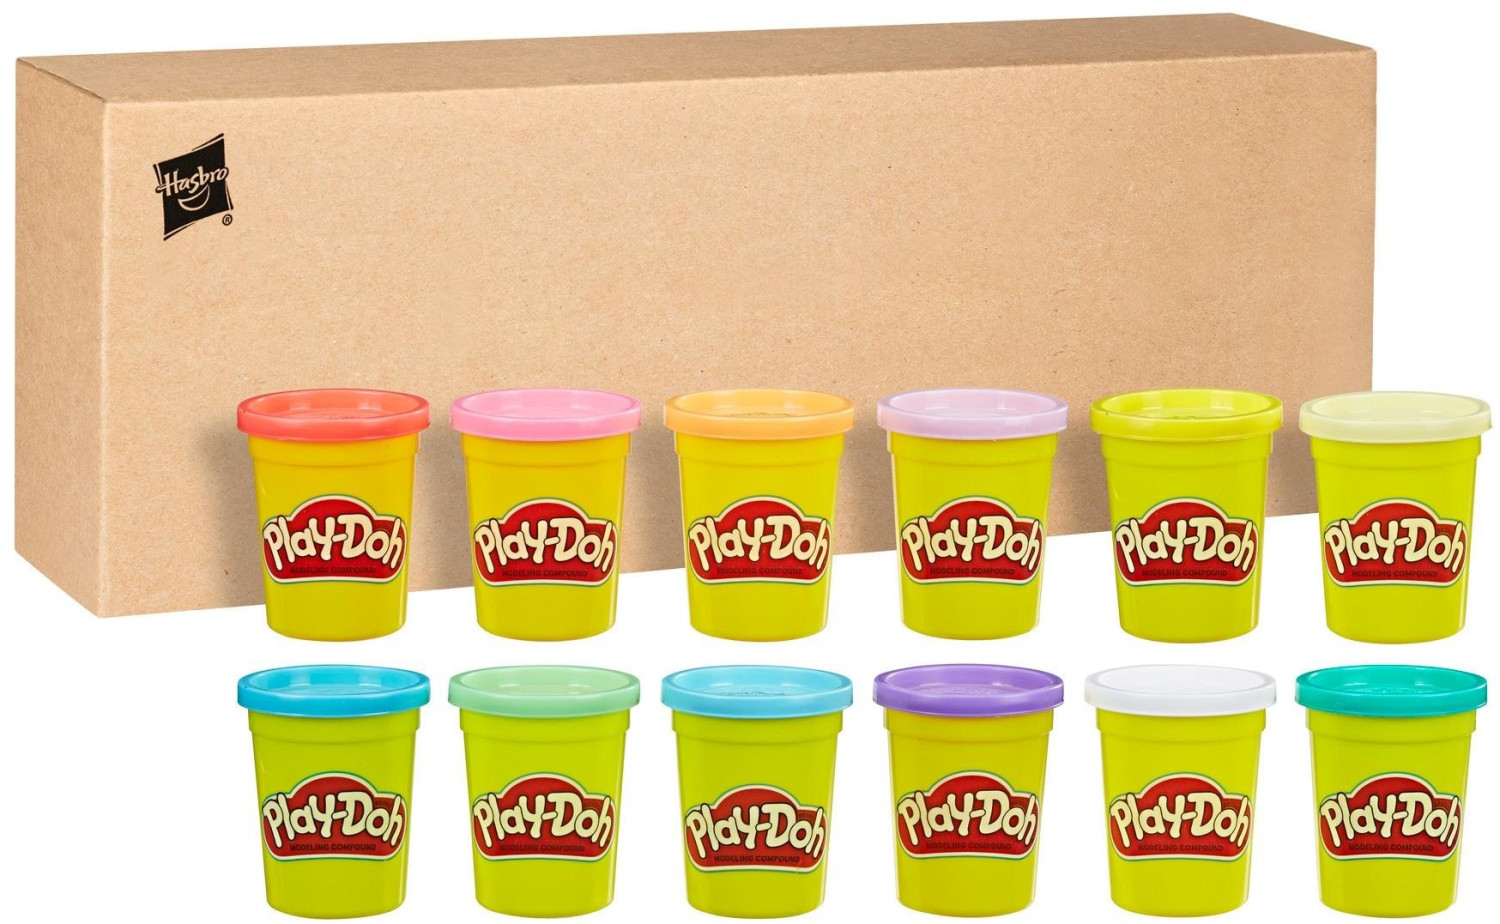 Photos - Creativity Set / Science Kit Play-Doh Spring Colors 12-Pack 